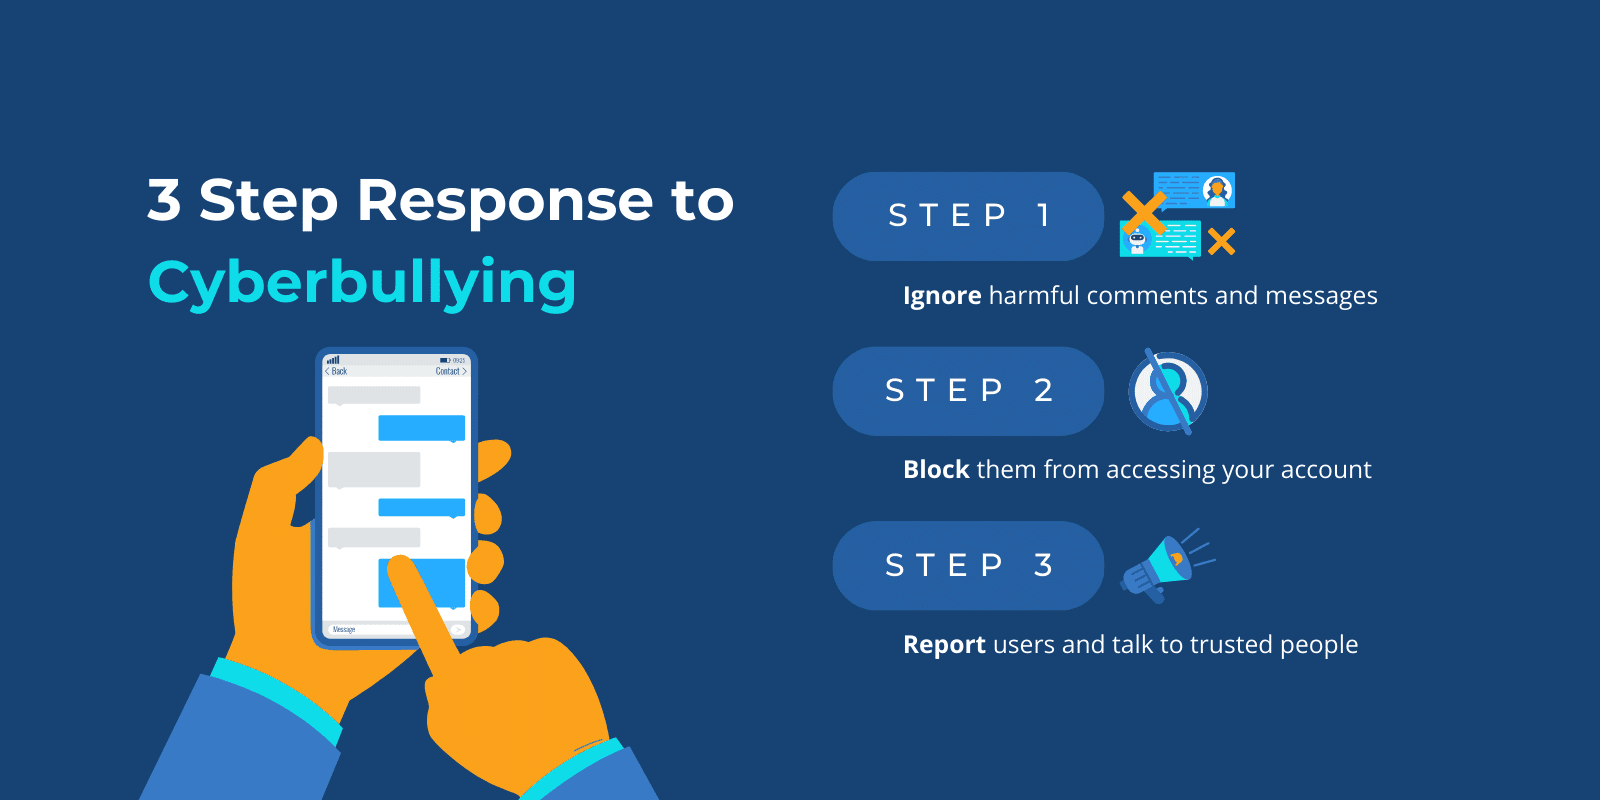 3 Step response to cyberbullying with relevant icons and a digital illustration of hands holding a smartphone with the messenger app opened.